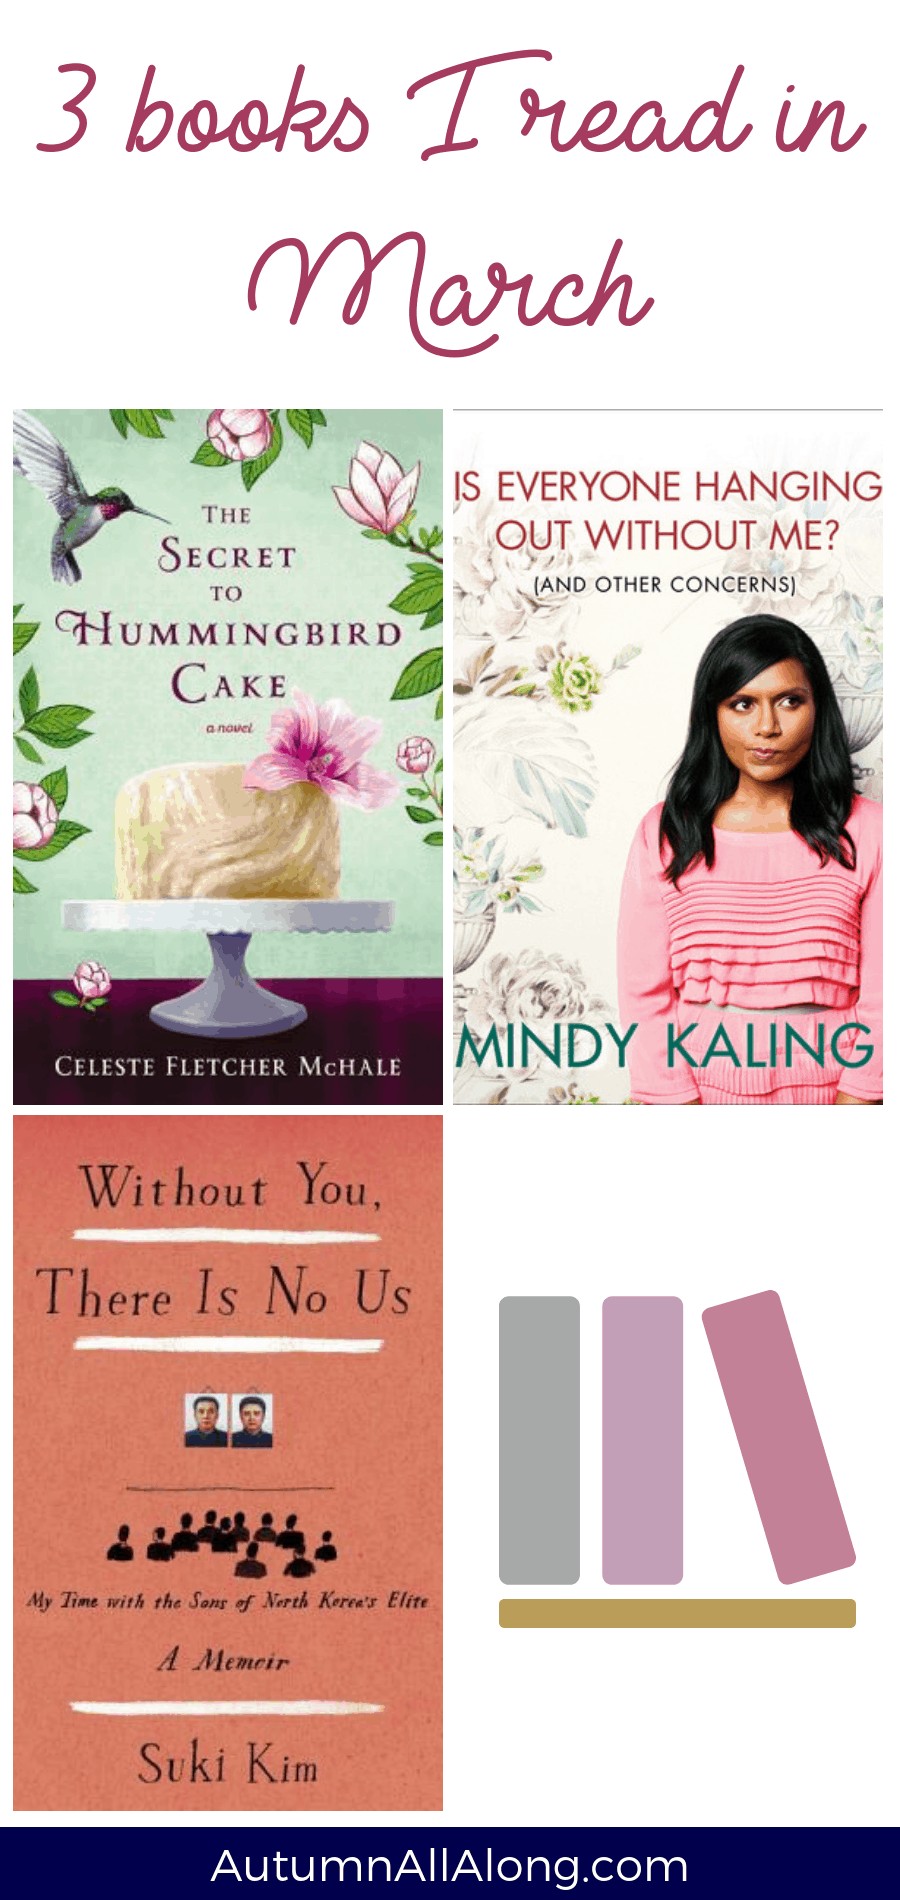 March bookshelf updates// what did I read this month? Reviews on: The Secret to Hummingbird Cake; Without You, There is No Us: My Time with the Sons of North Korea's Elite; Is Everyone Hanging Out Without Me? (And Other Concerns). | via Autumn All Along